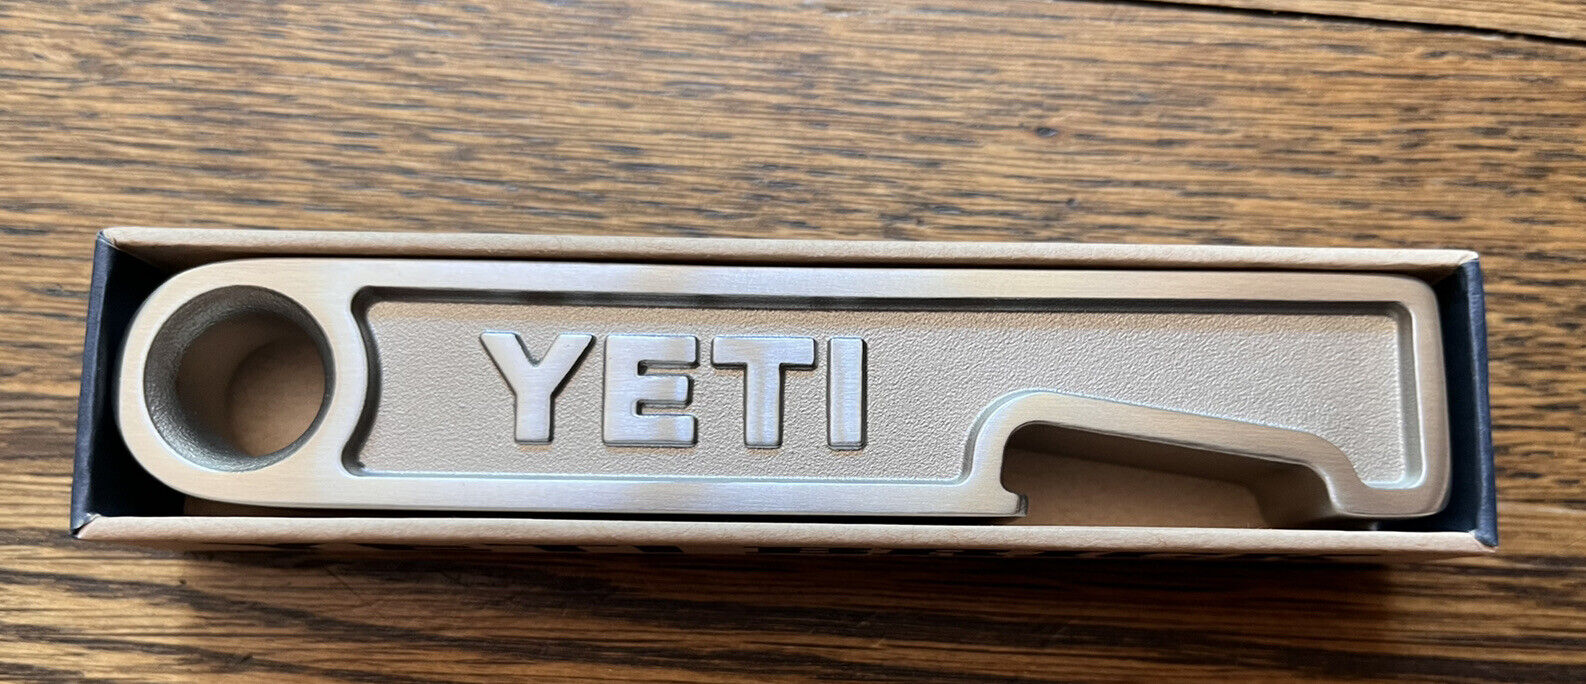 Yeti Cooler Brick Bottle Opener V2 Limited Edition Brand New In Box NIB Limited